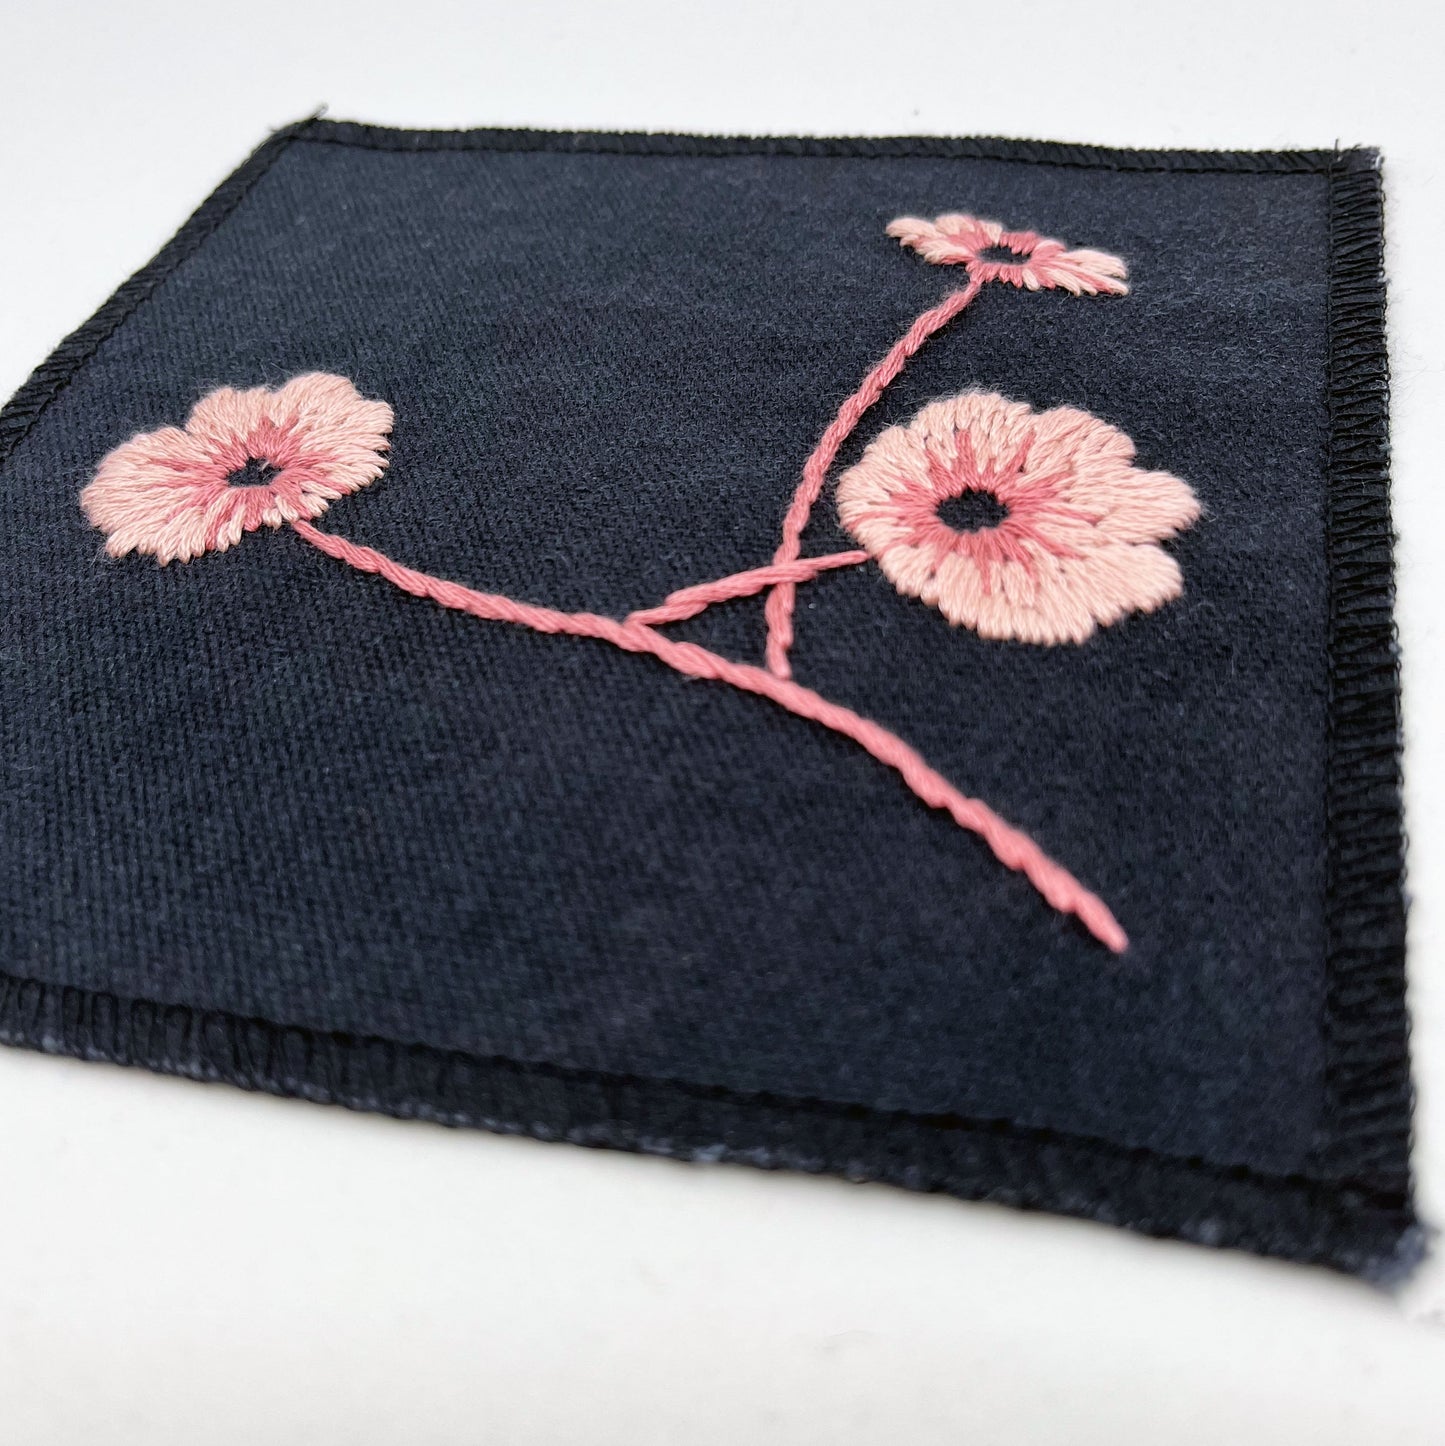 a close up angled view of a black colored square patch, hand embroidered with three poppies on a stem, in shades of pink, with overlocked edges, on a white background